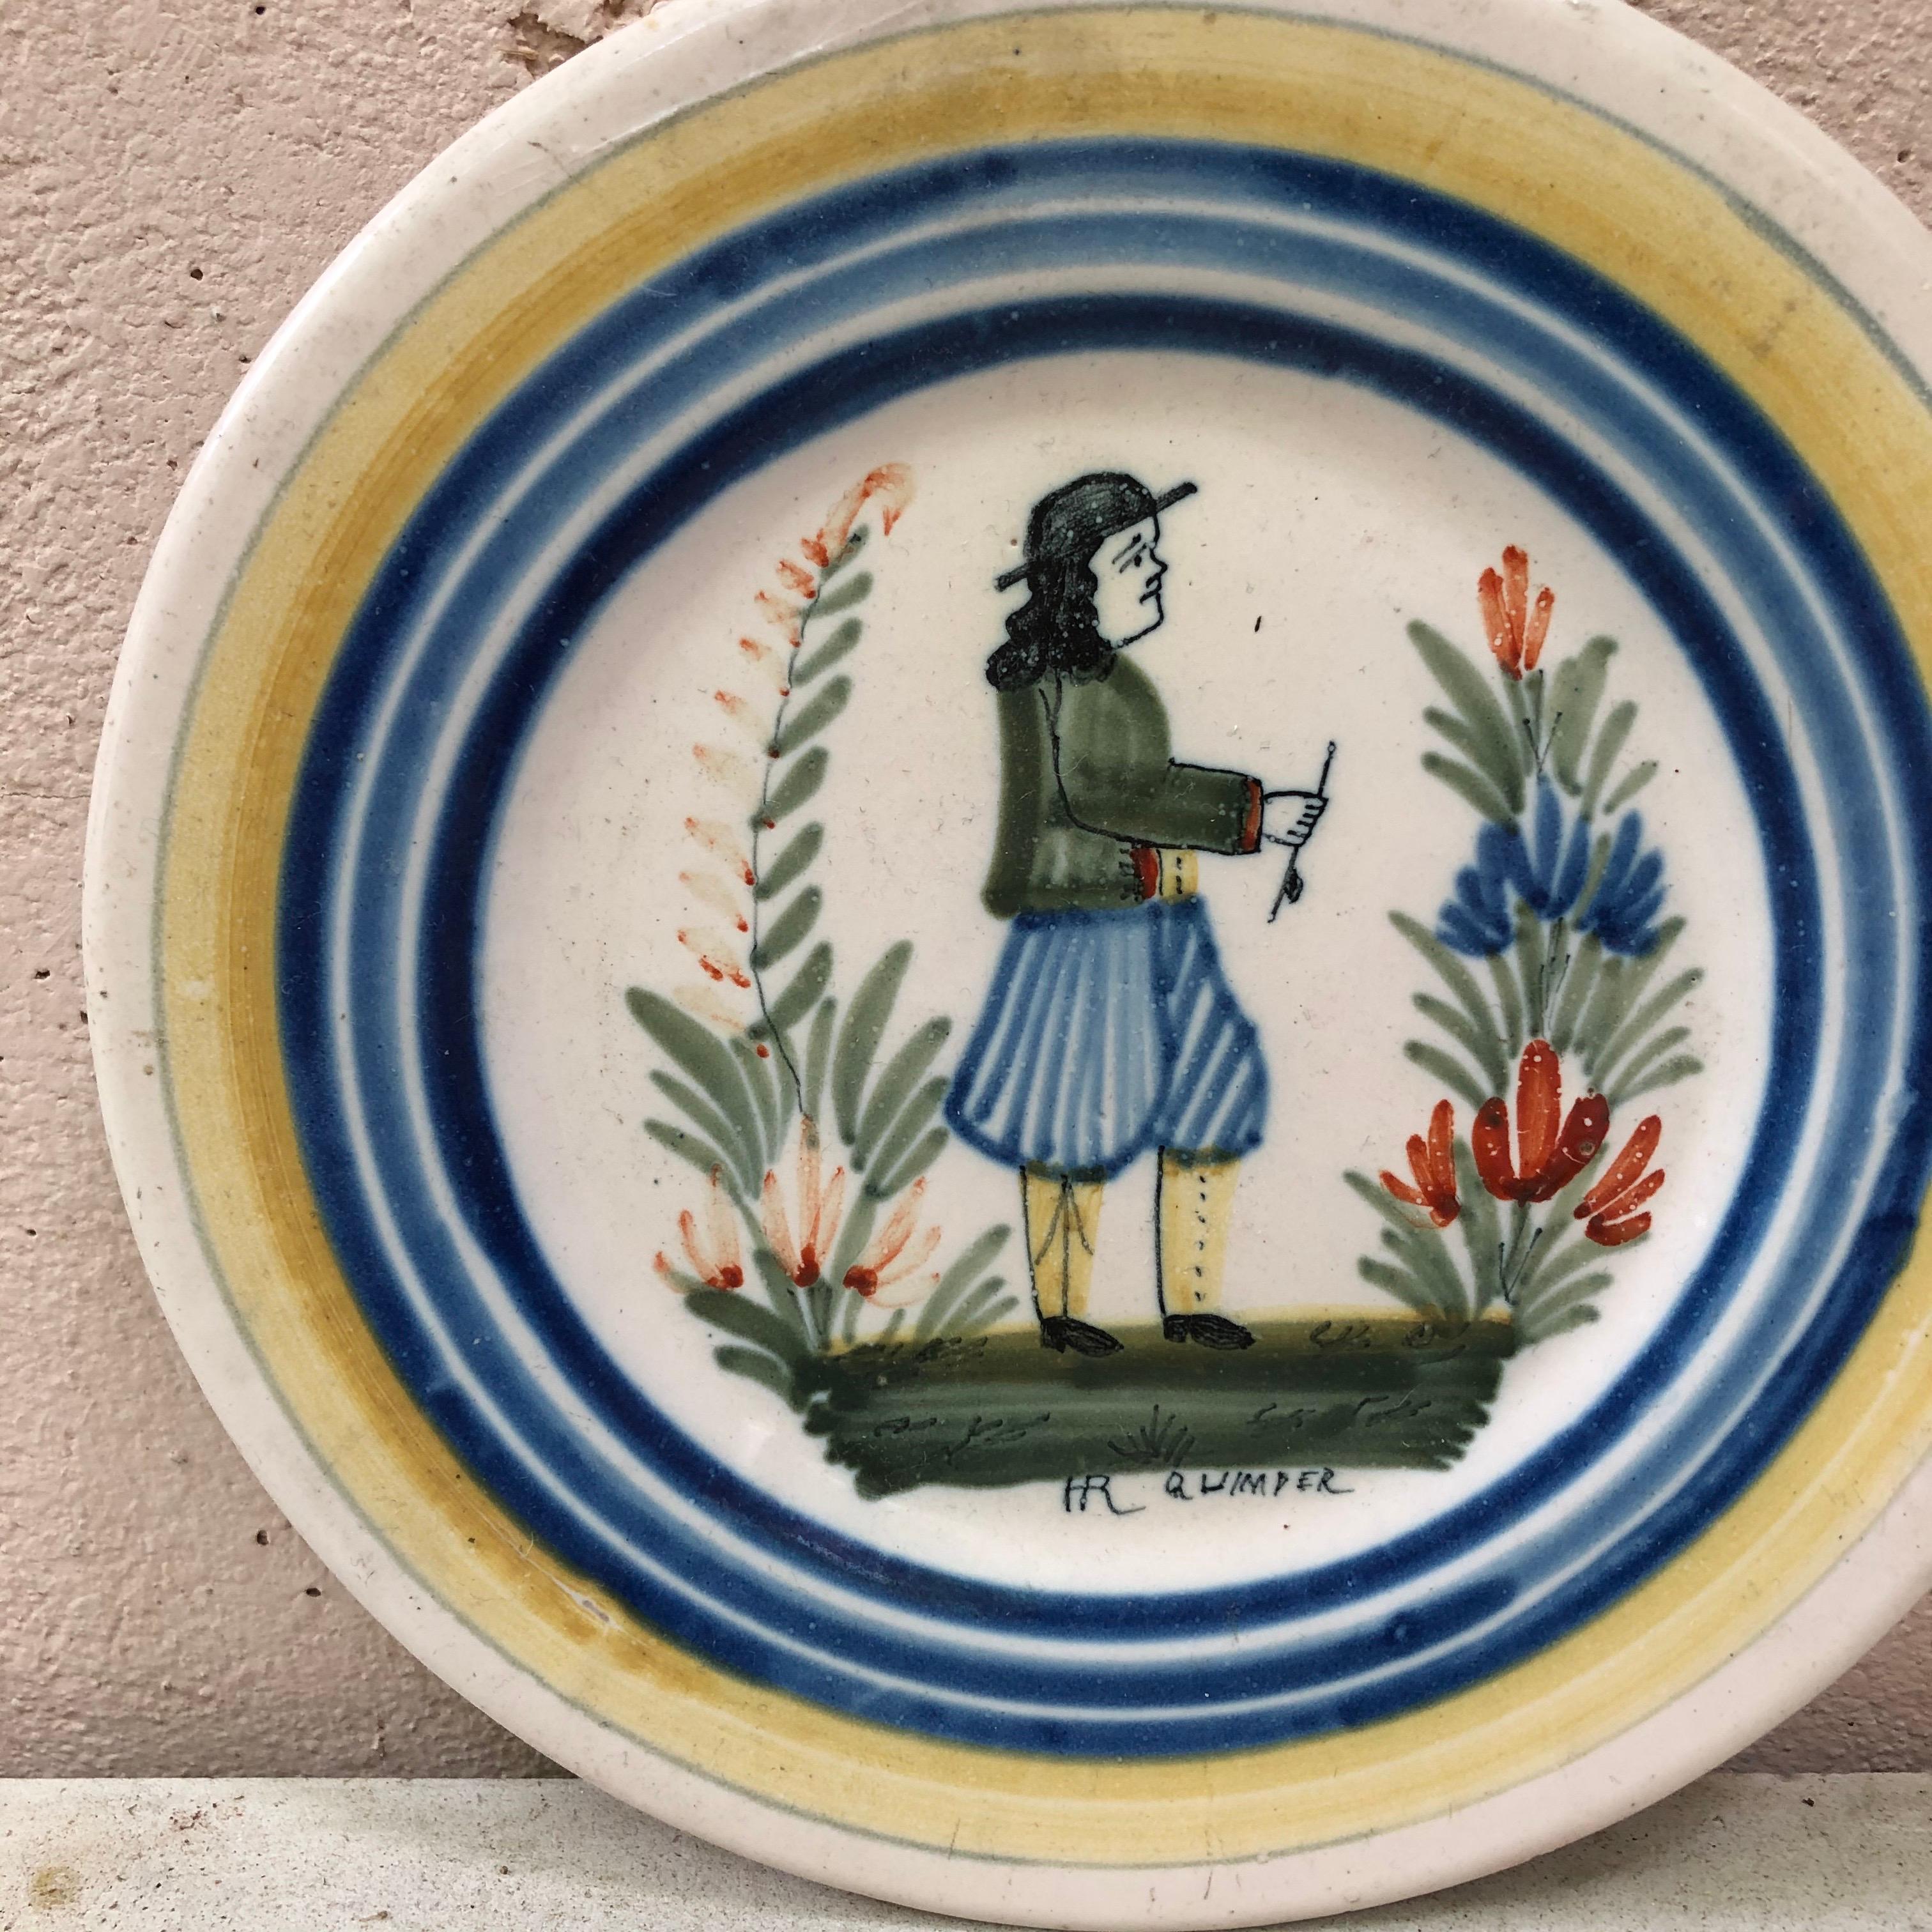 A French faience plate with a Breton farmer in the costume with flowers signed Henriot Quimper, circa 1930.
Colorful yellow border and blue lines.